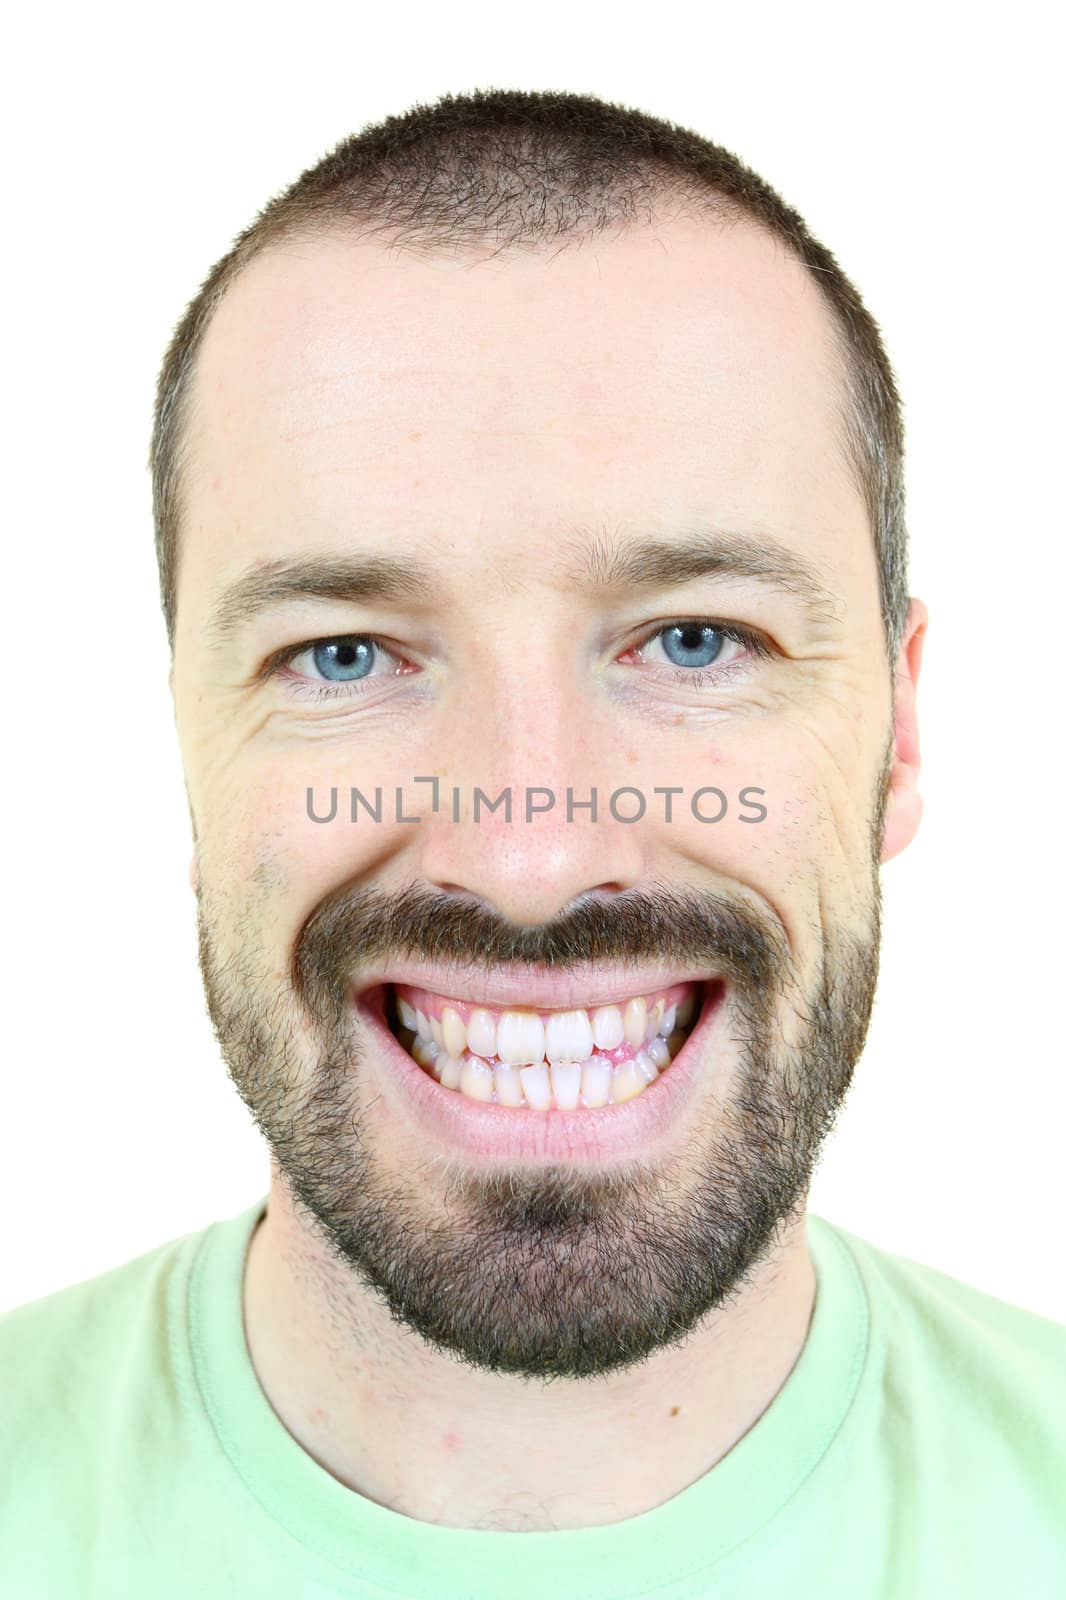 Happy smiling man. Young adult near his 30s - portrait isolated against white background. Short-haired male.